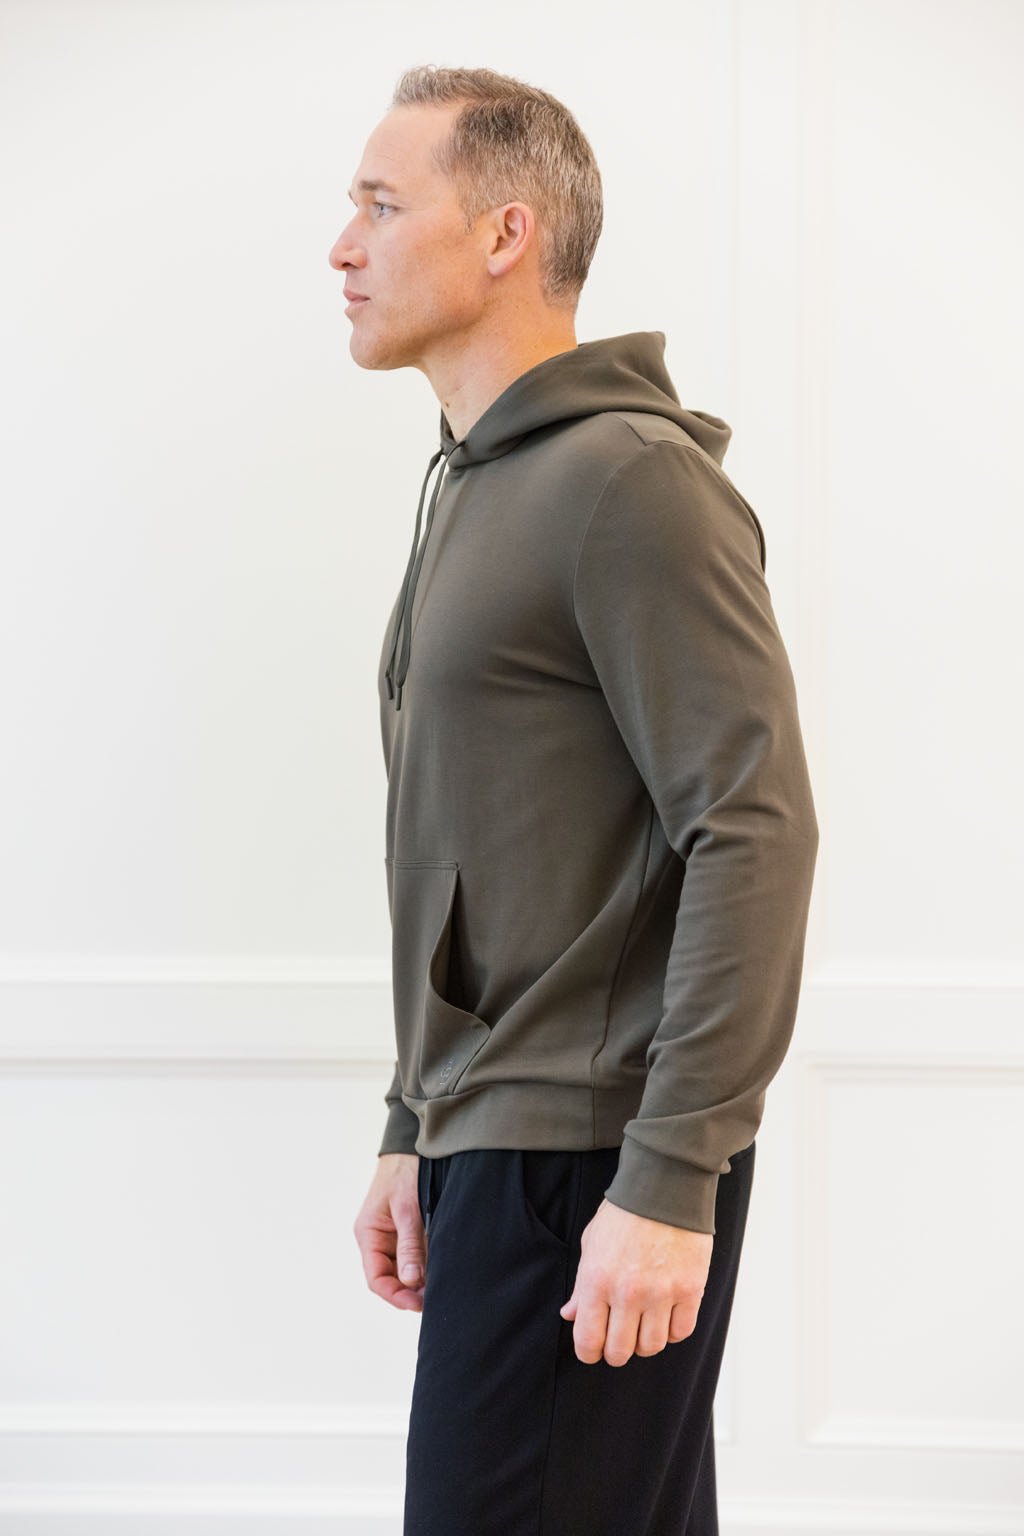 Hunter Bamboo Hoodie worn by man standing in front of white background.